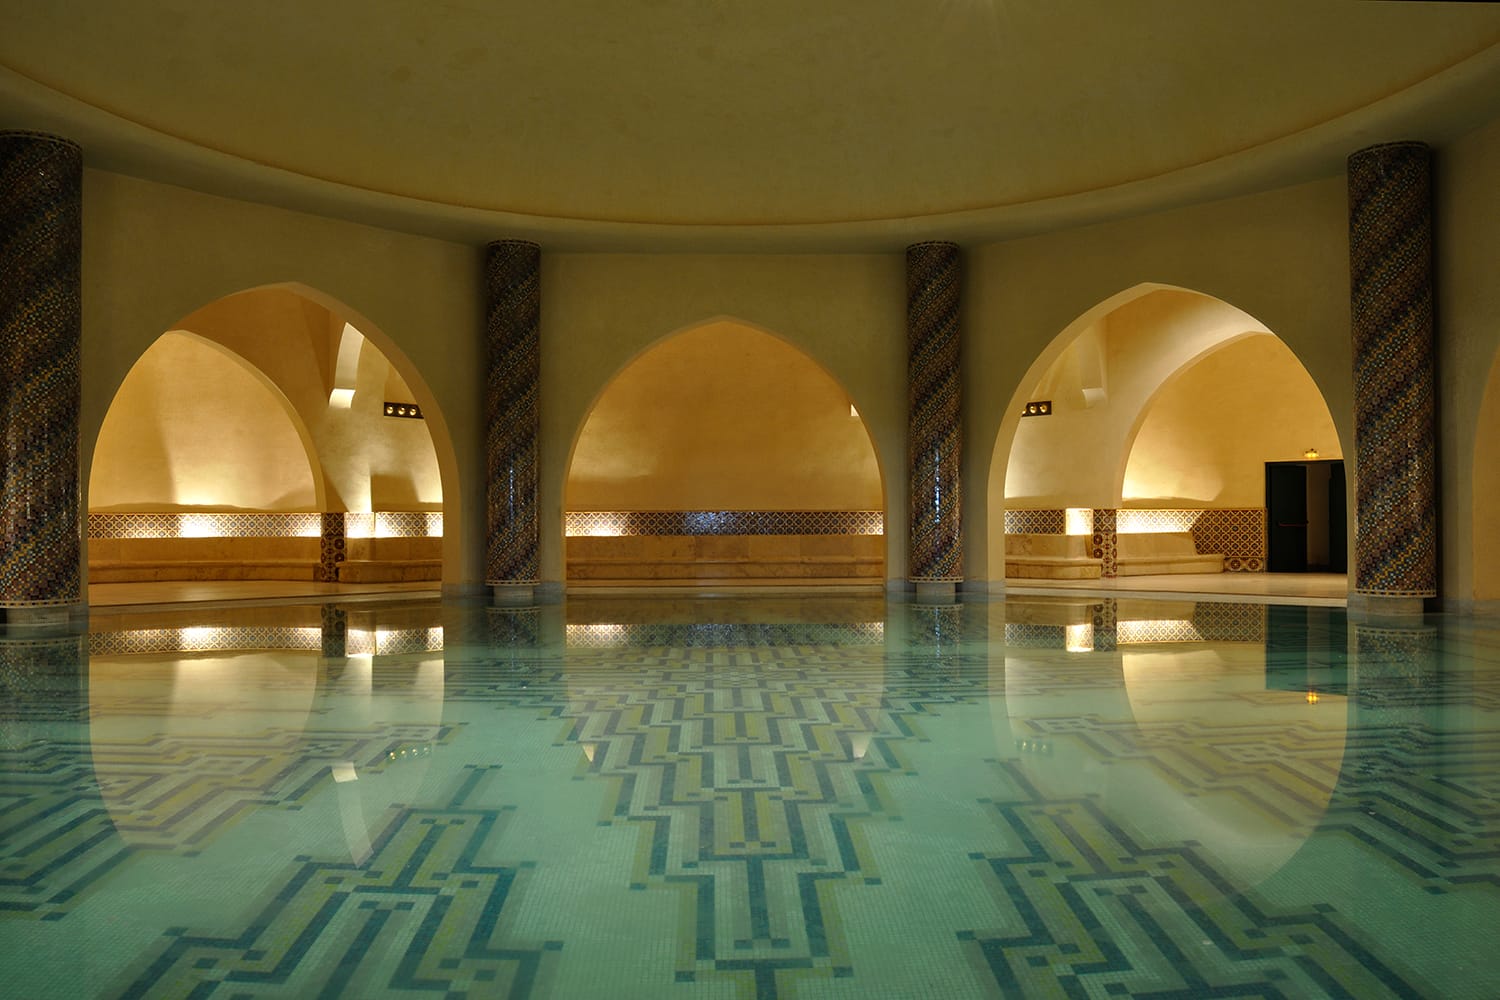 Inside of a traditional Hammam in Morocco, Africa